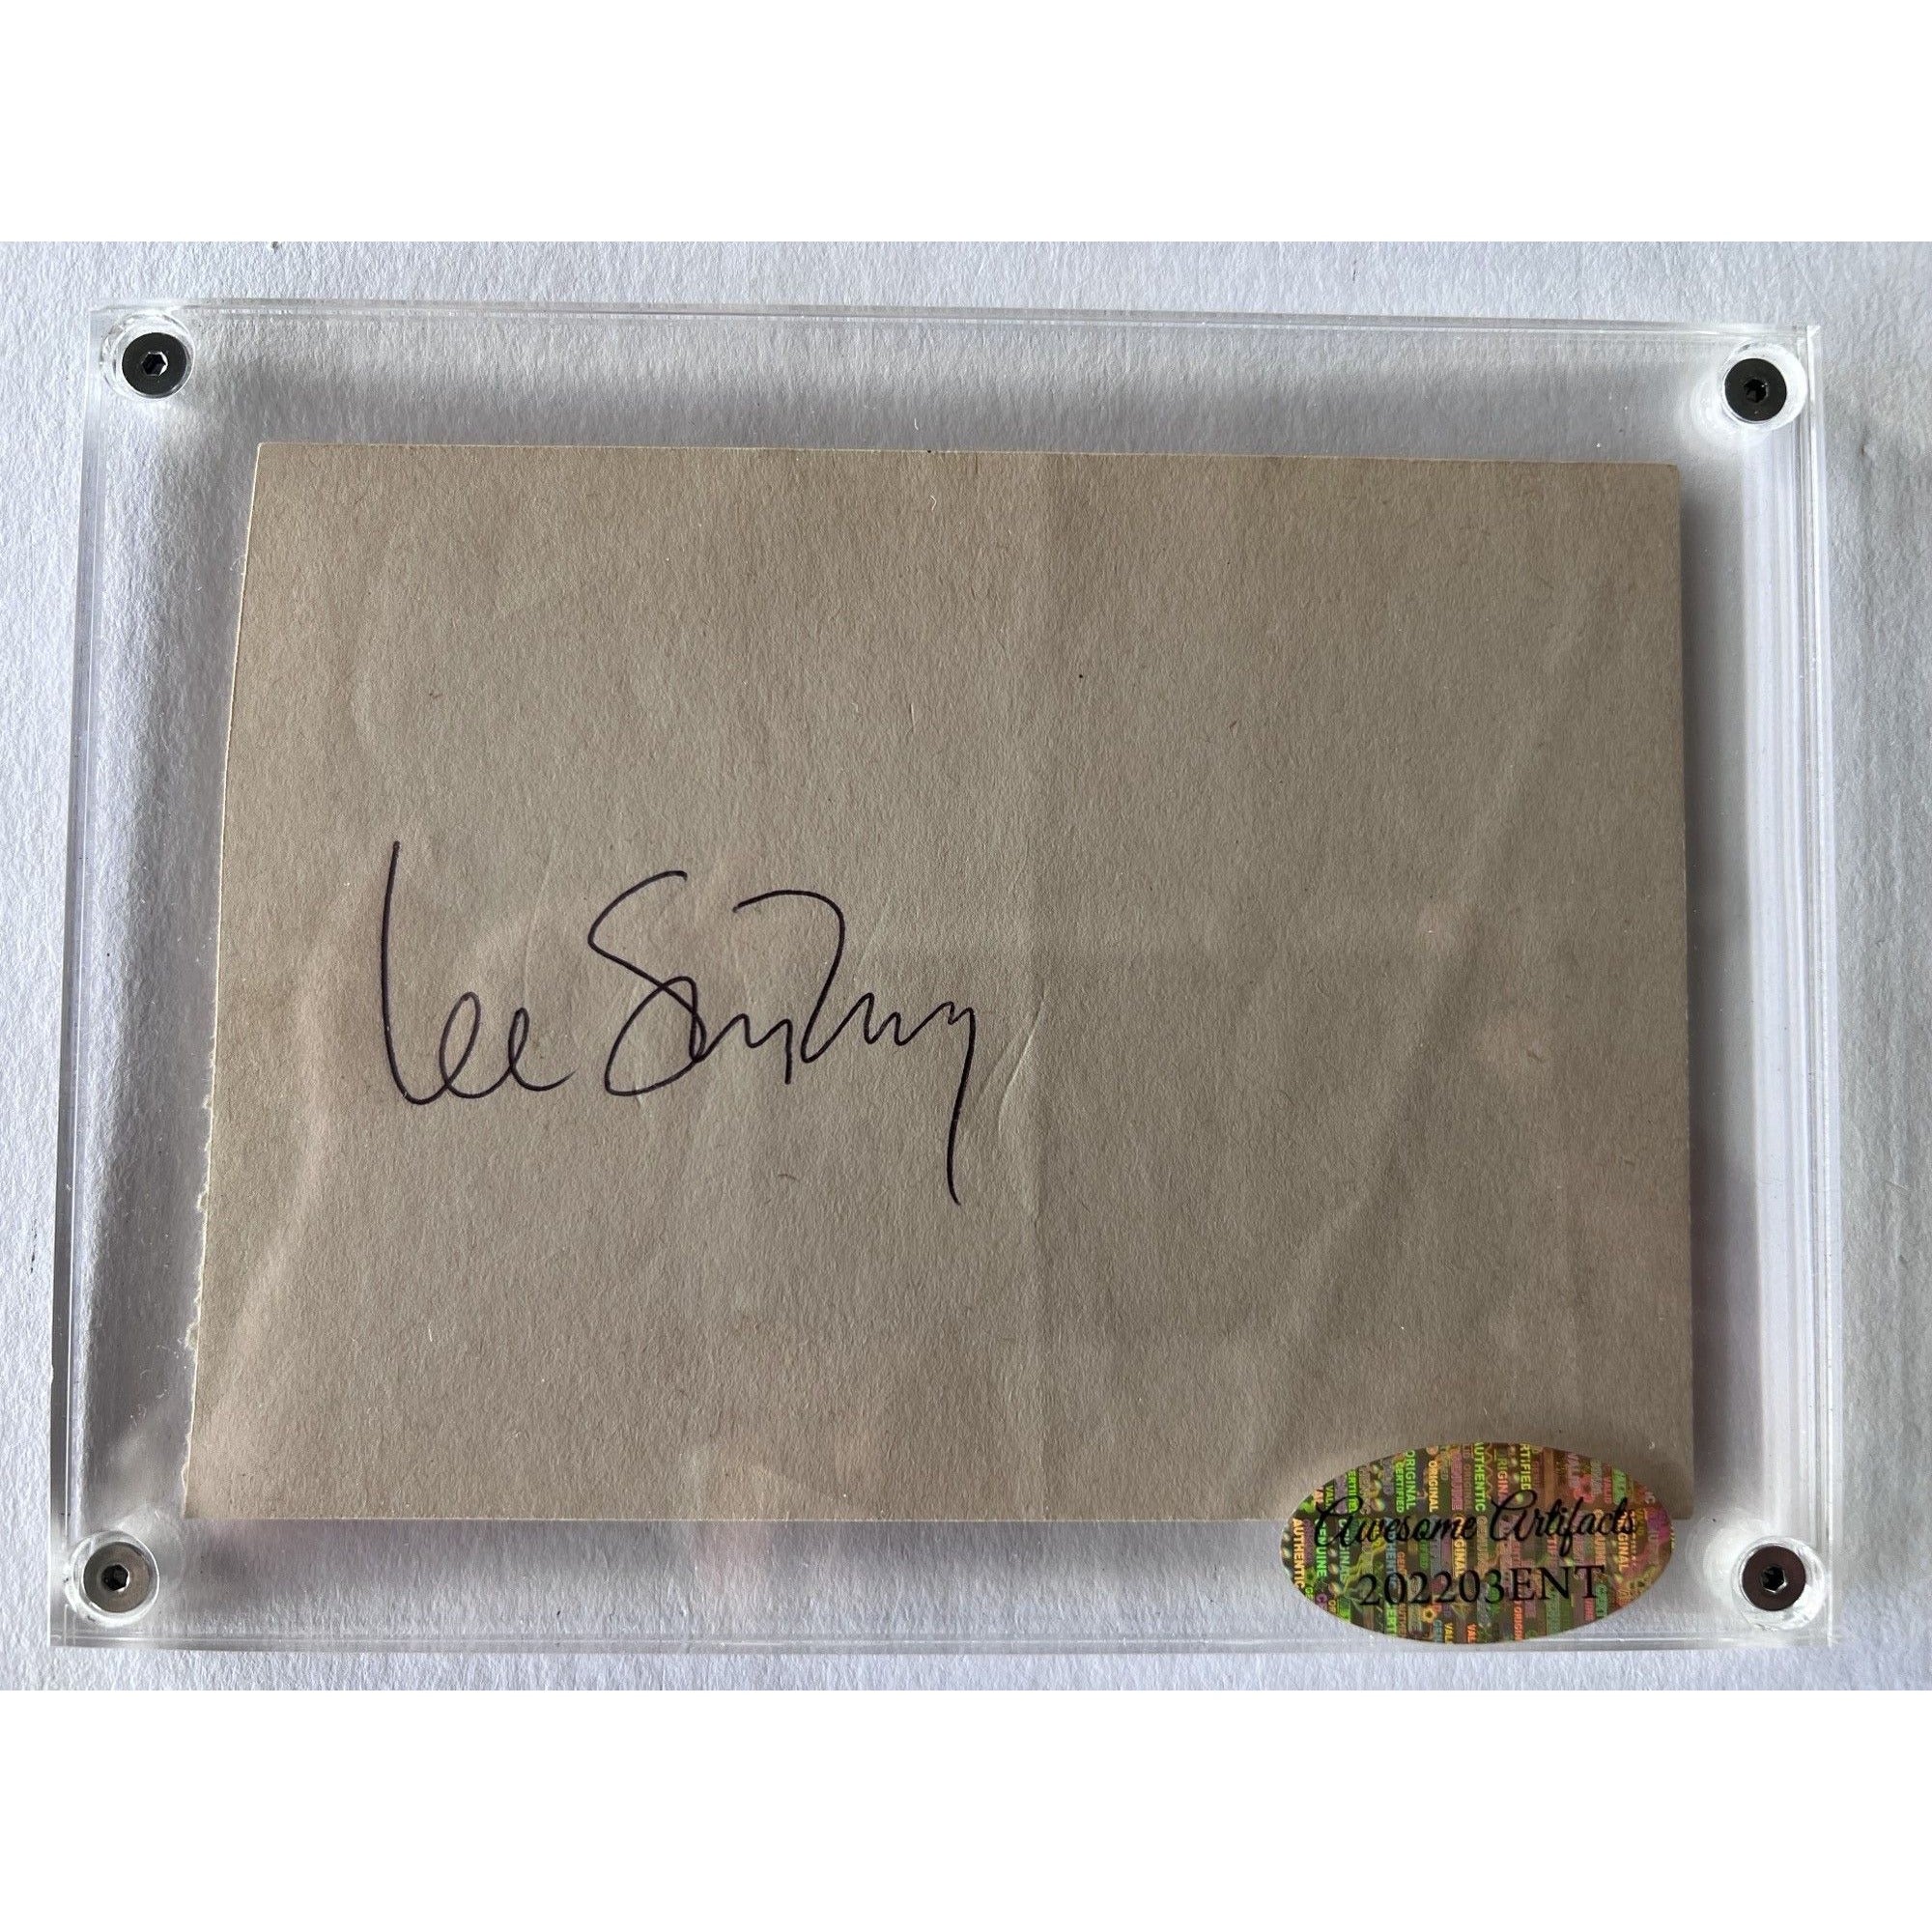 Lee Strasberg "Hyman Roth Godfather Part II" autograph book page signed